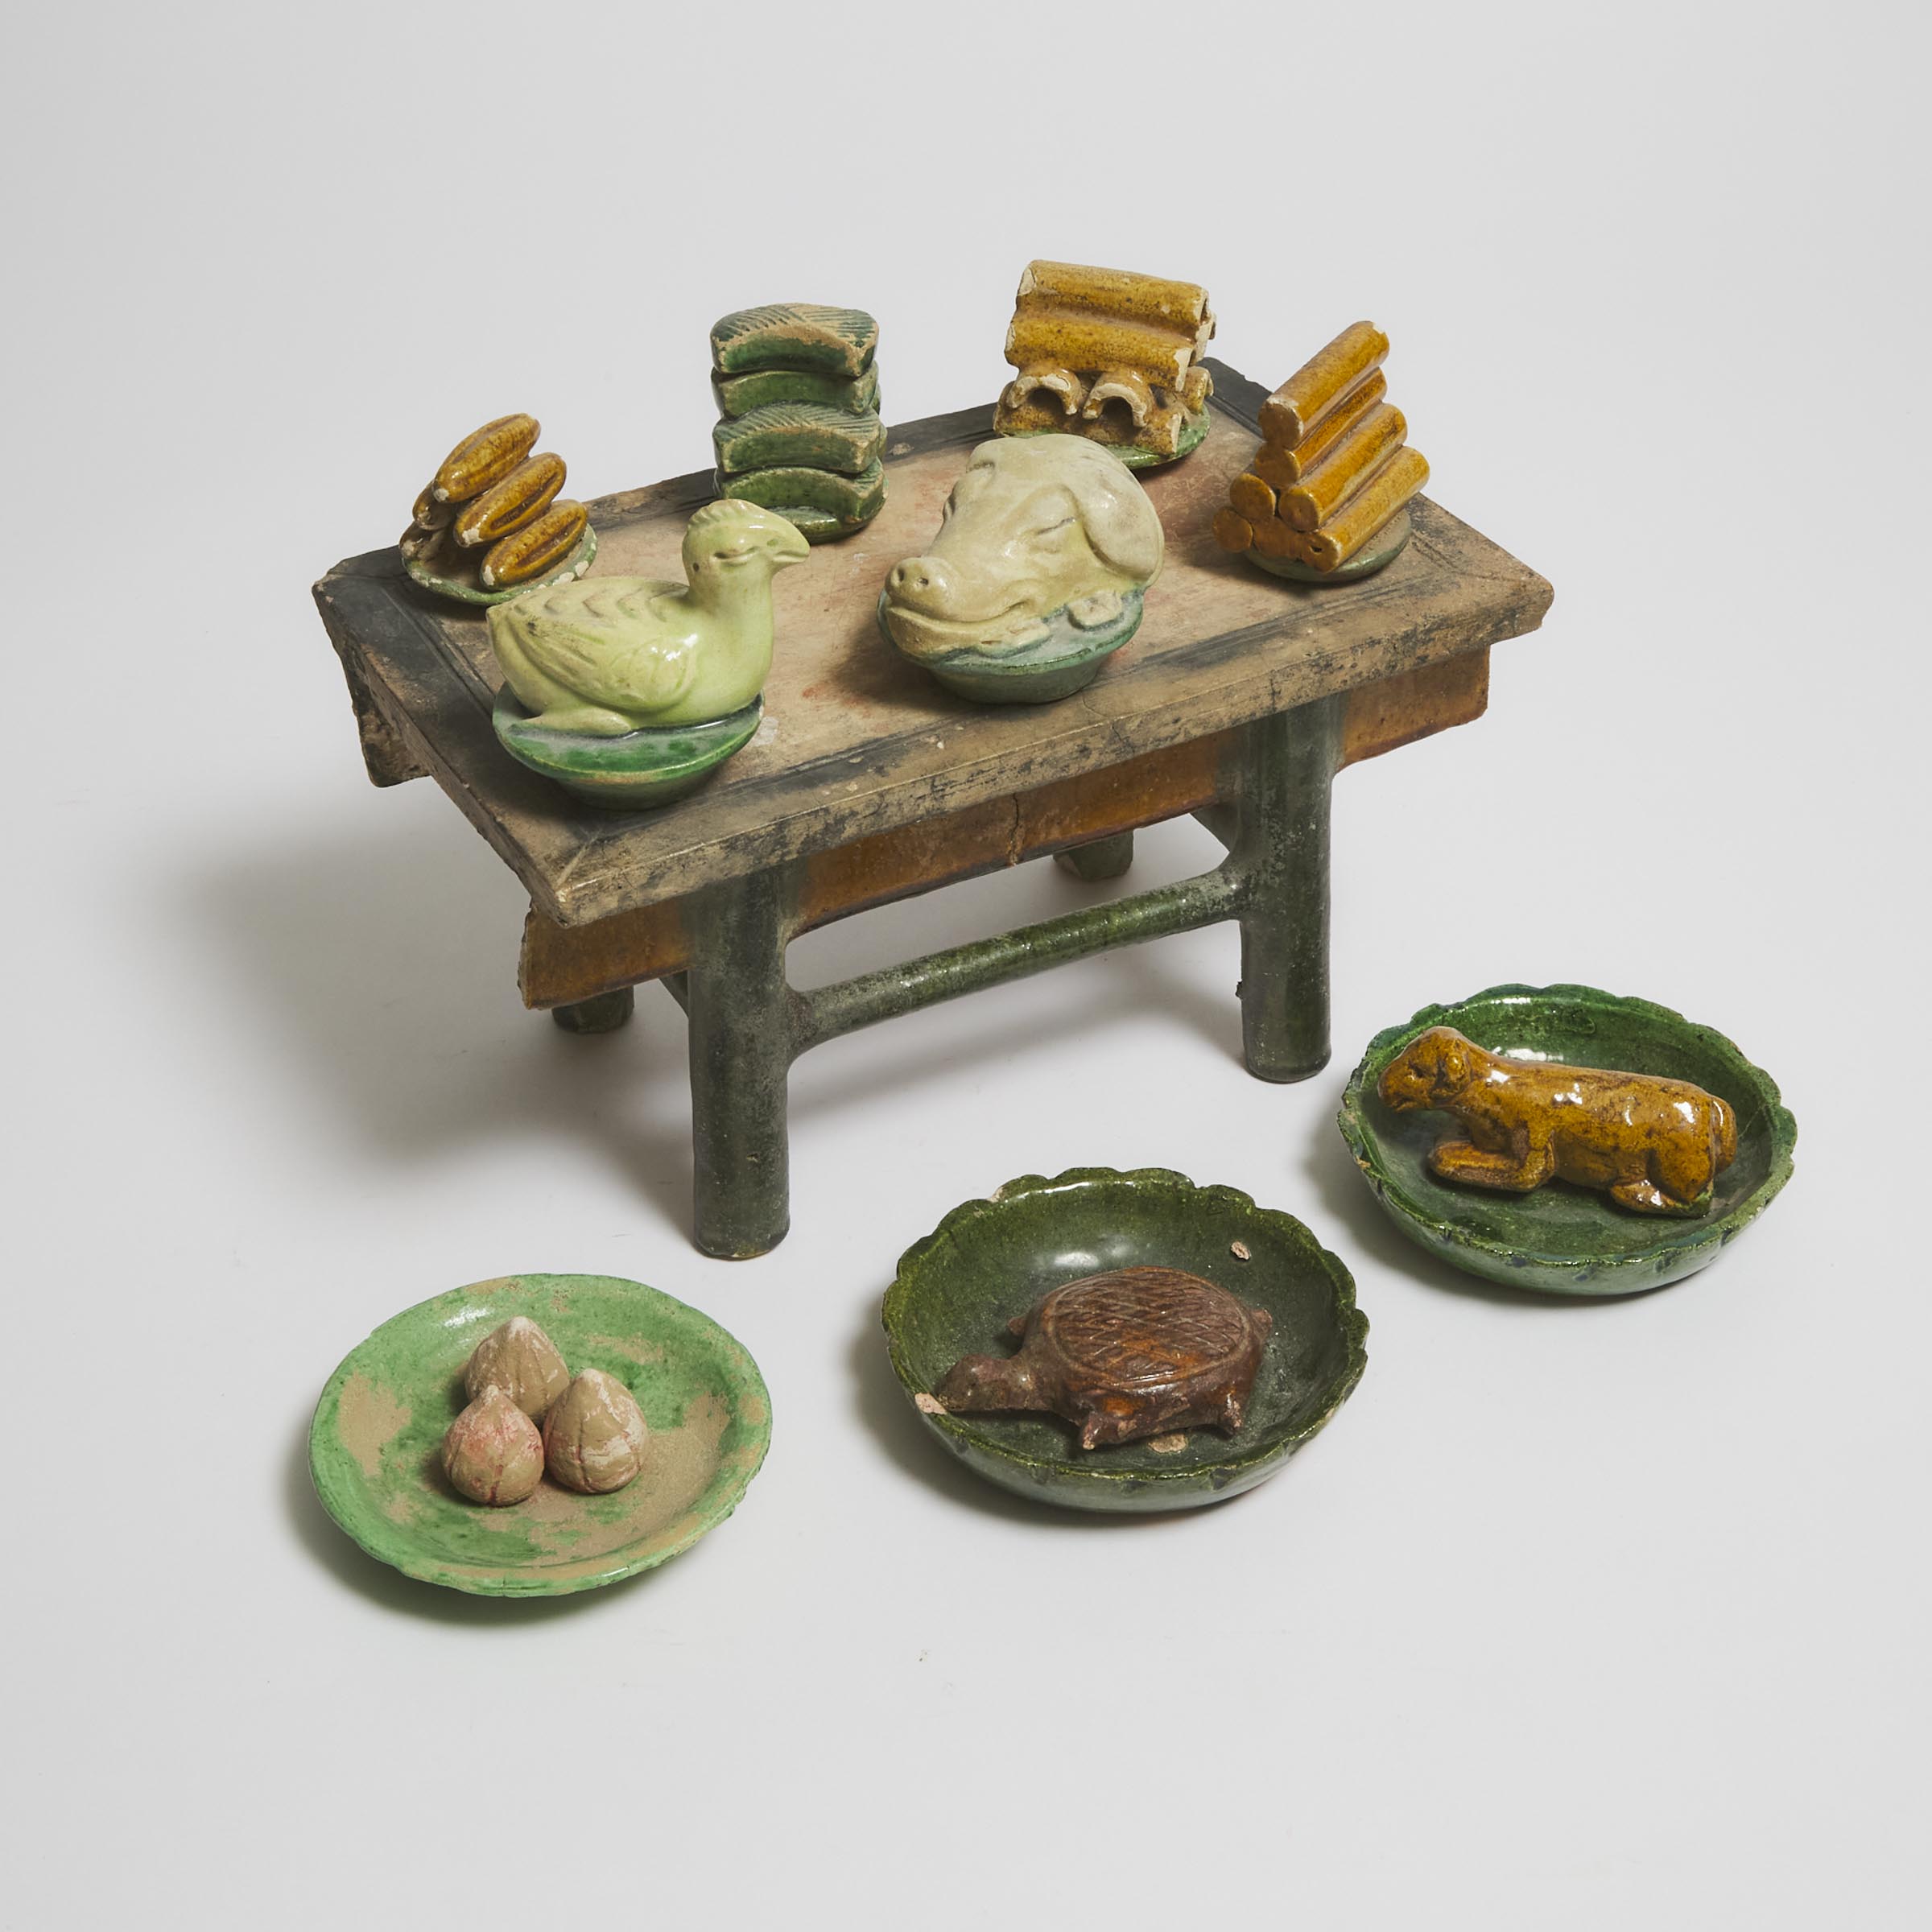 A Set of Ten Sancai-Glazed Pottery Food Offerings and Table, Ming Dynasty (1368-1644)